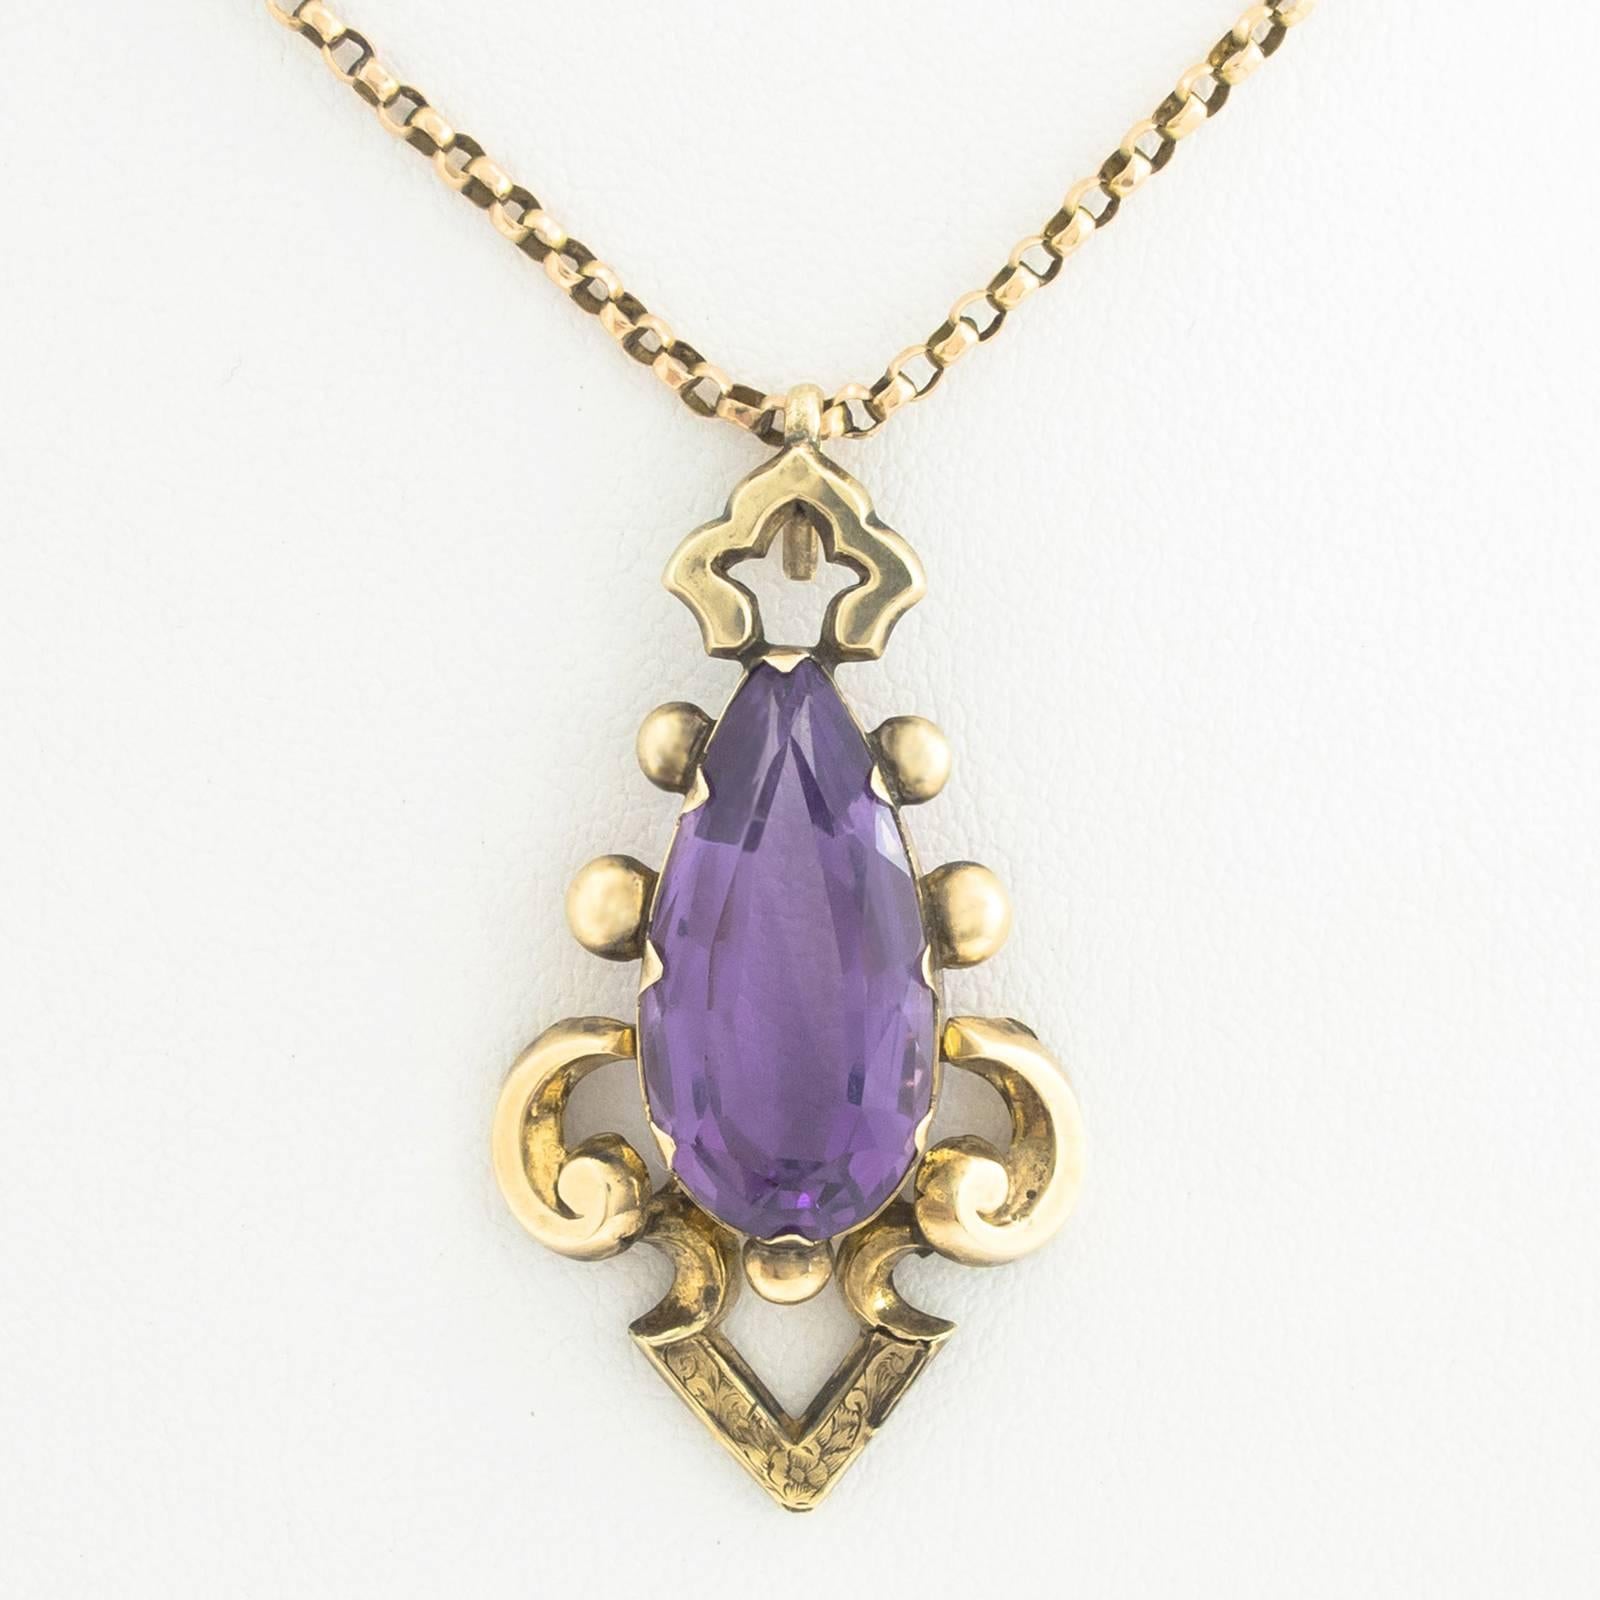 This gorgeous pendeloque cut and faceted Amethyst gemstone is large at a full inch long. It is set in a hand crafted nicely detailed red gold mount with delicate chasing. The finished pendant measures 1.75 inches long x 0.50 inch wide.

Pendeloque